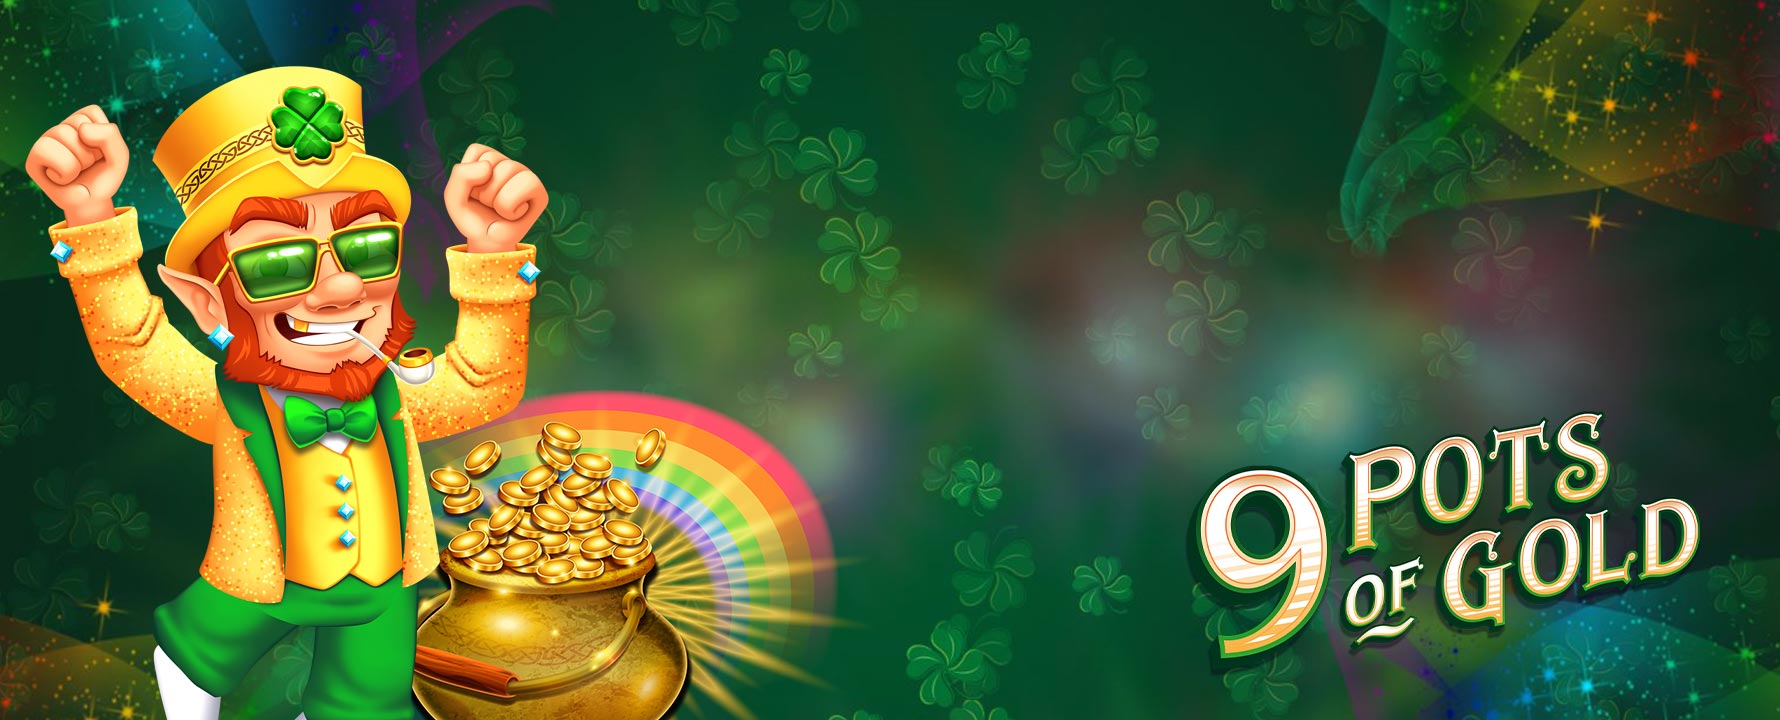 Shine up a good time with Microgaming’s 9 Pots of Gold™ online slot.